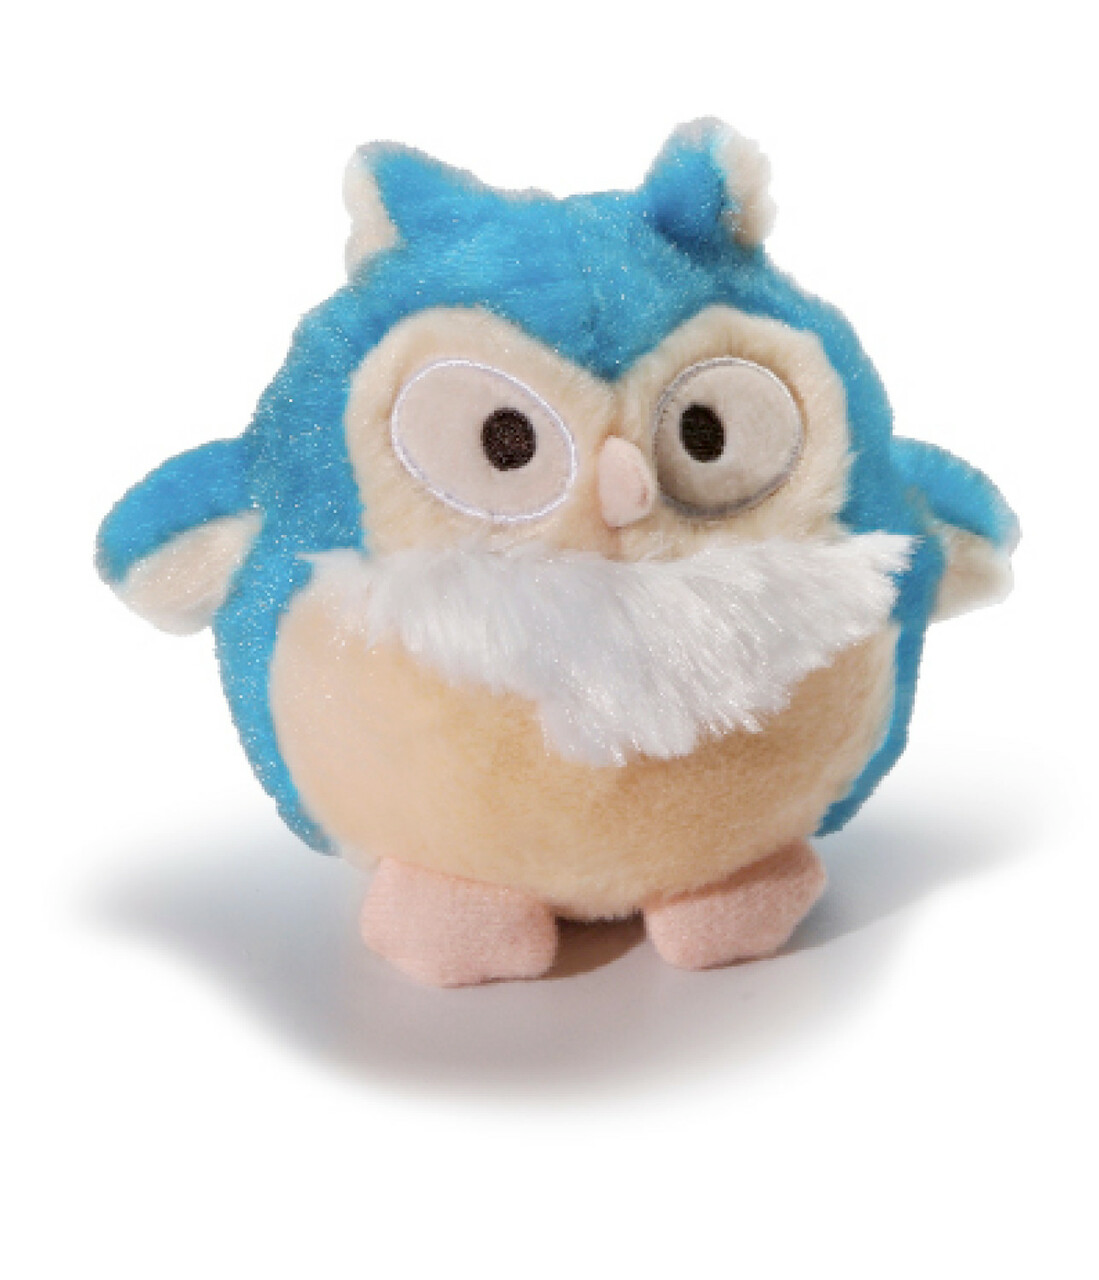 Howling Hoots Owl Dog Squeaky Plush Toy, Blue